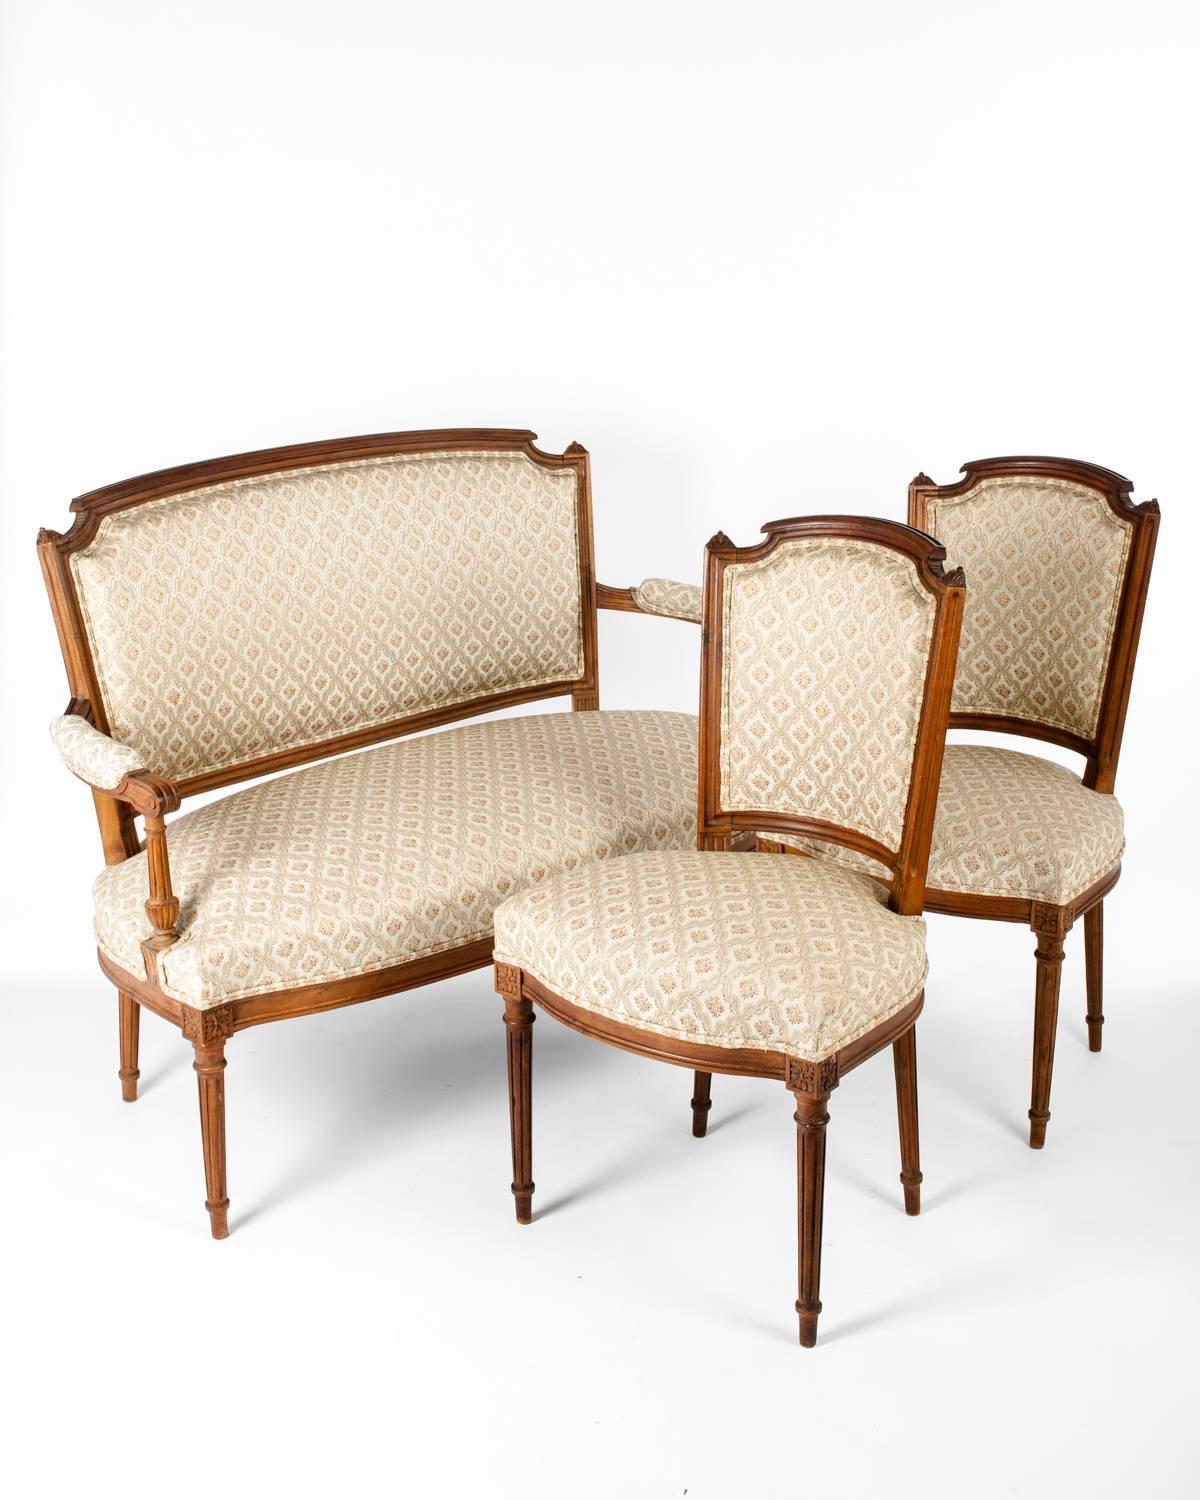 Early 20th Century Vintage French Settee with Two Chairs